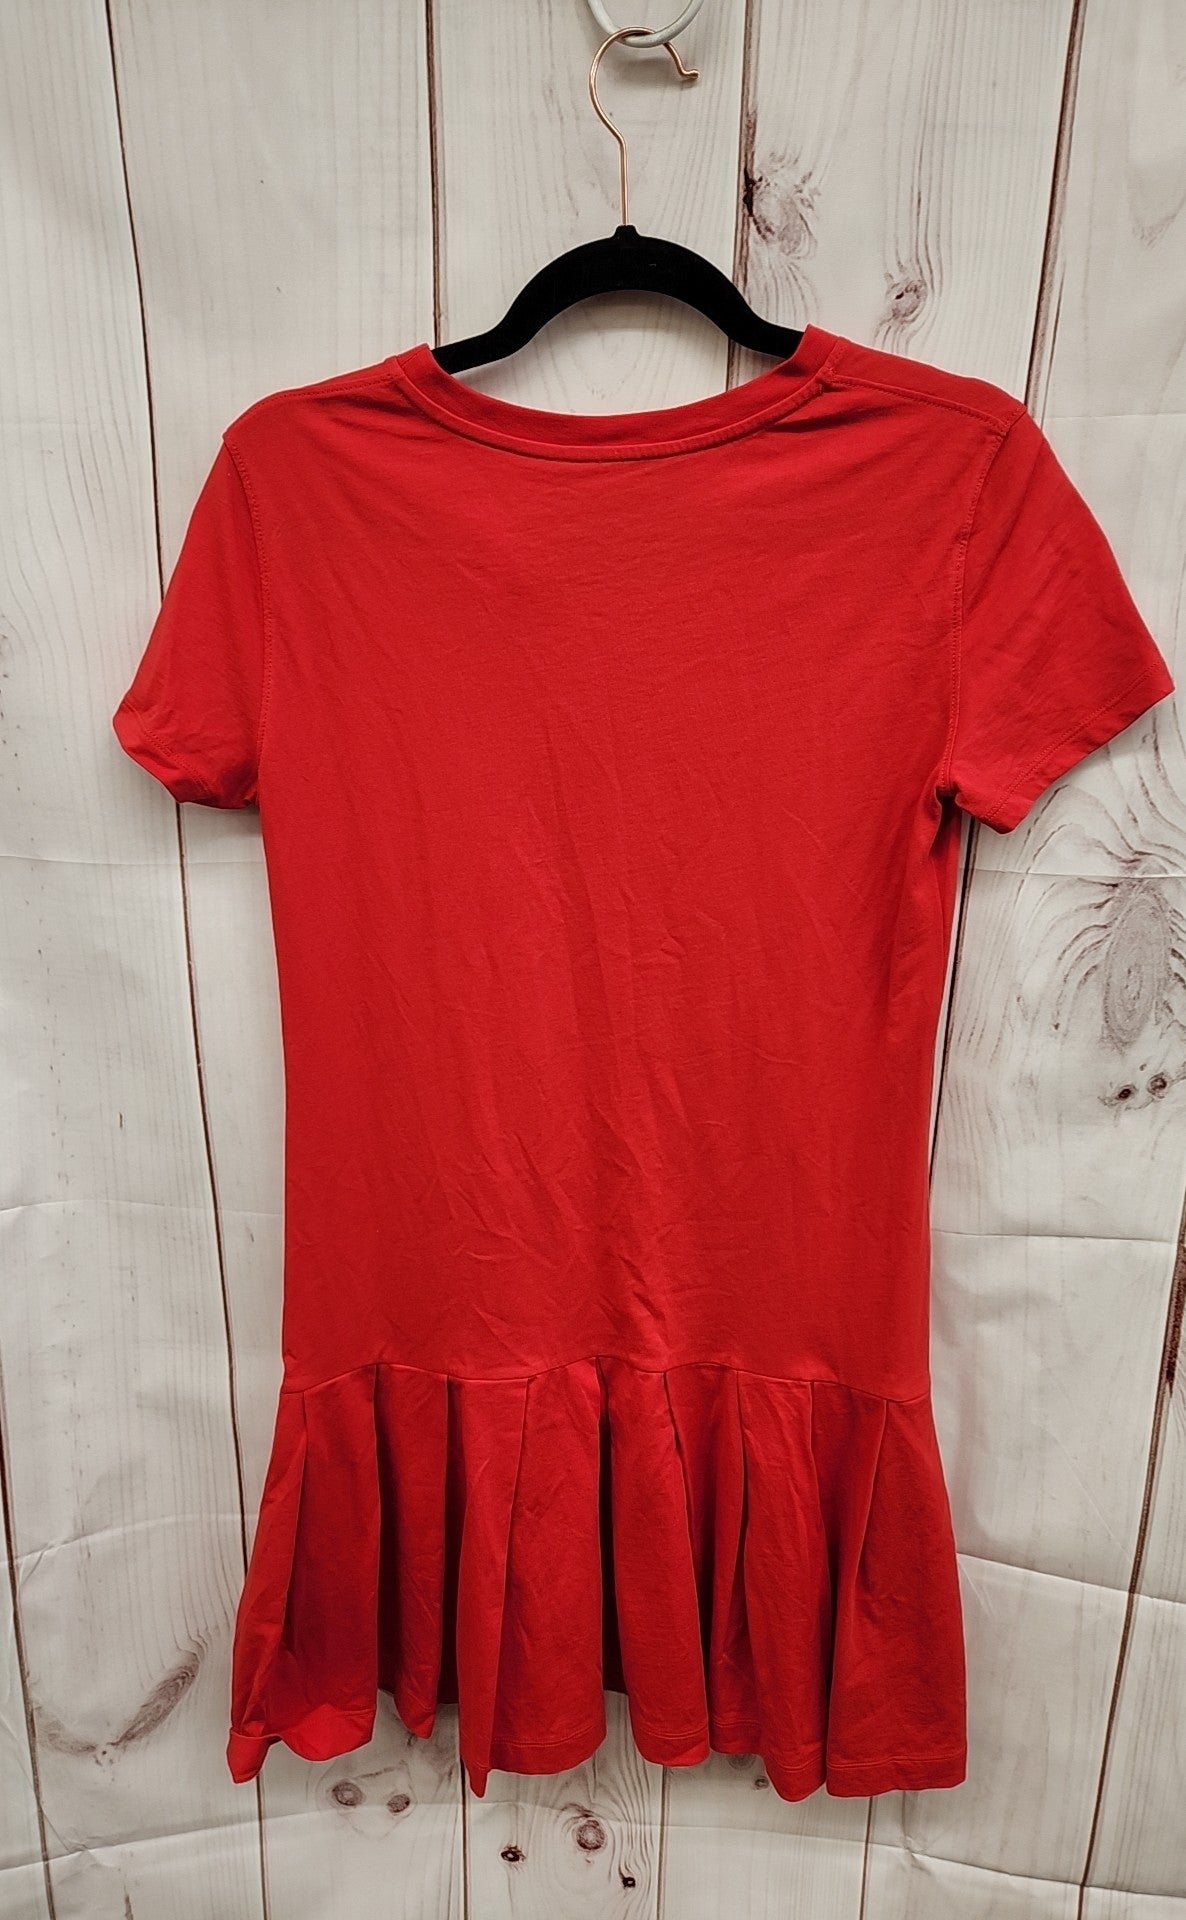 Moschino Couture In Love We Trust Women's Size S Red Dress